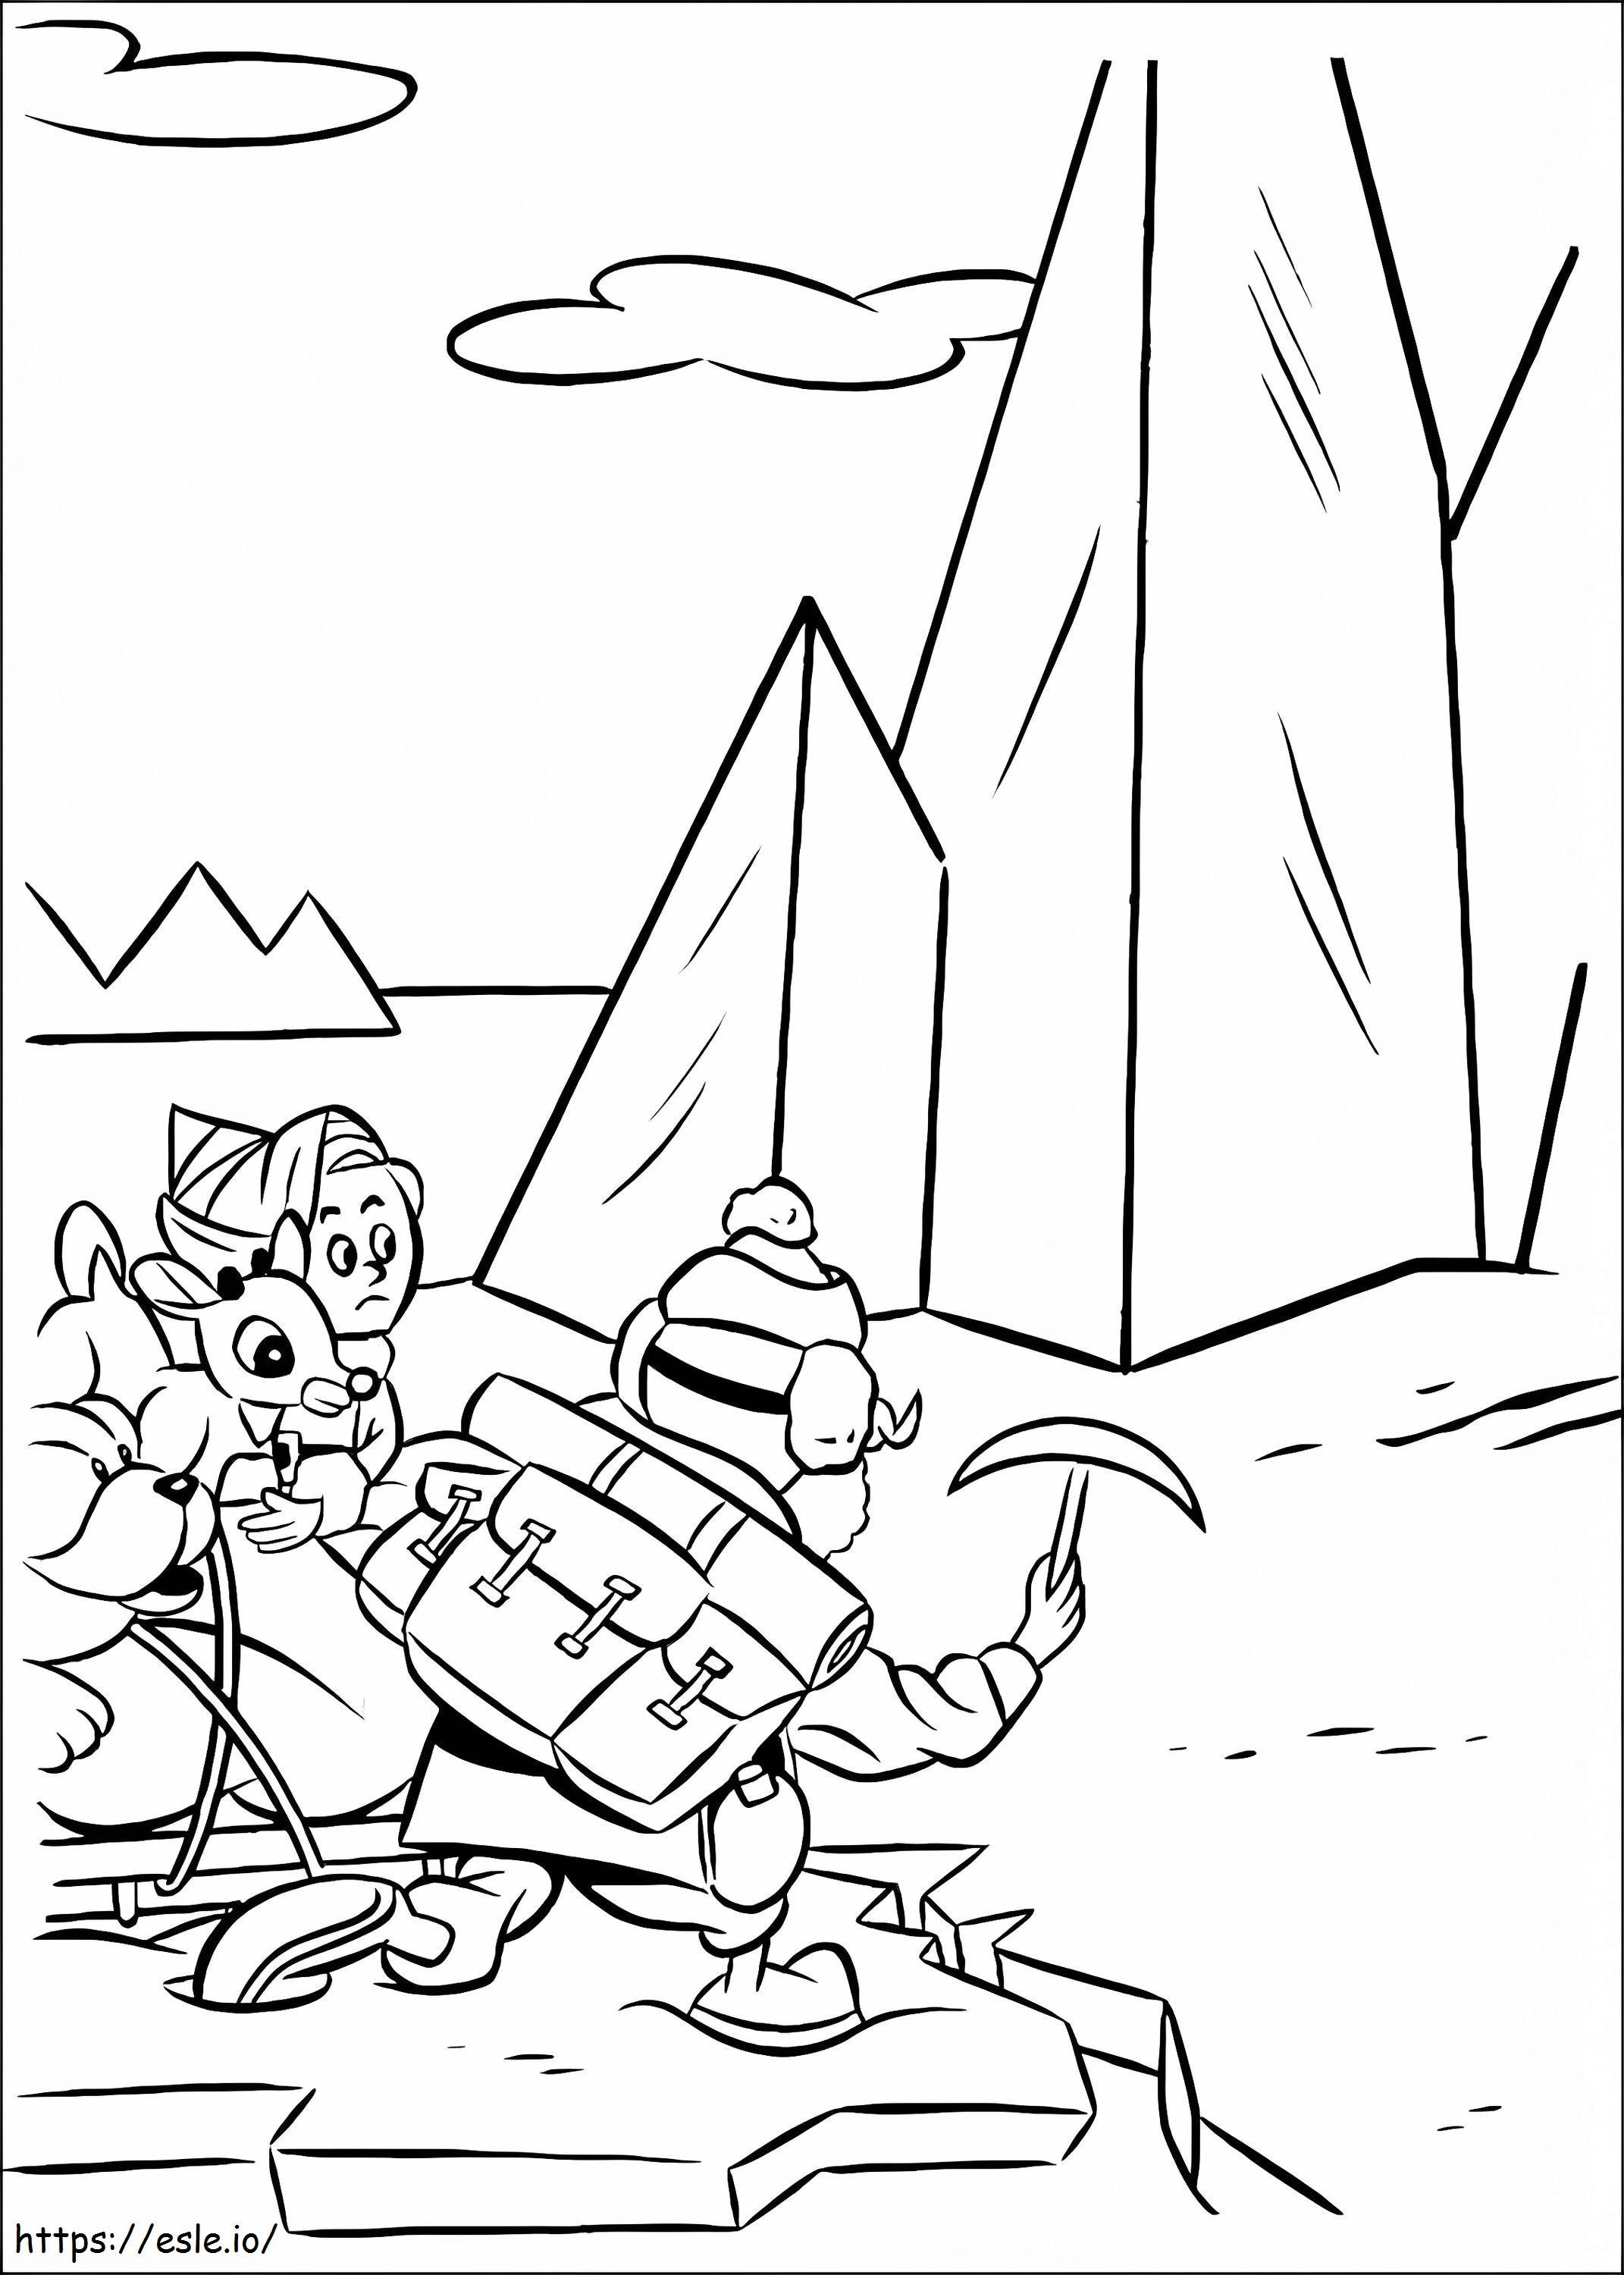 Rudolph 8 coloring page